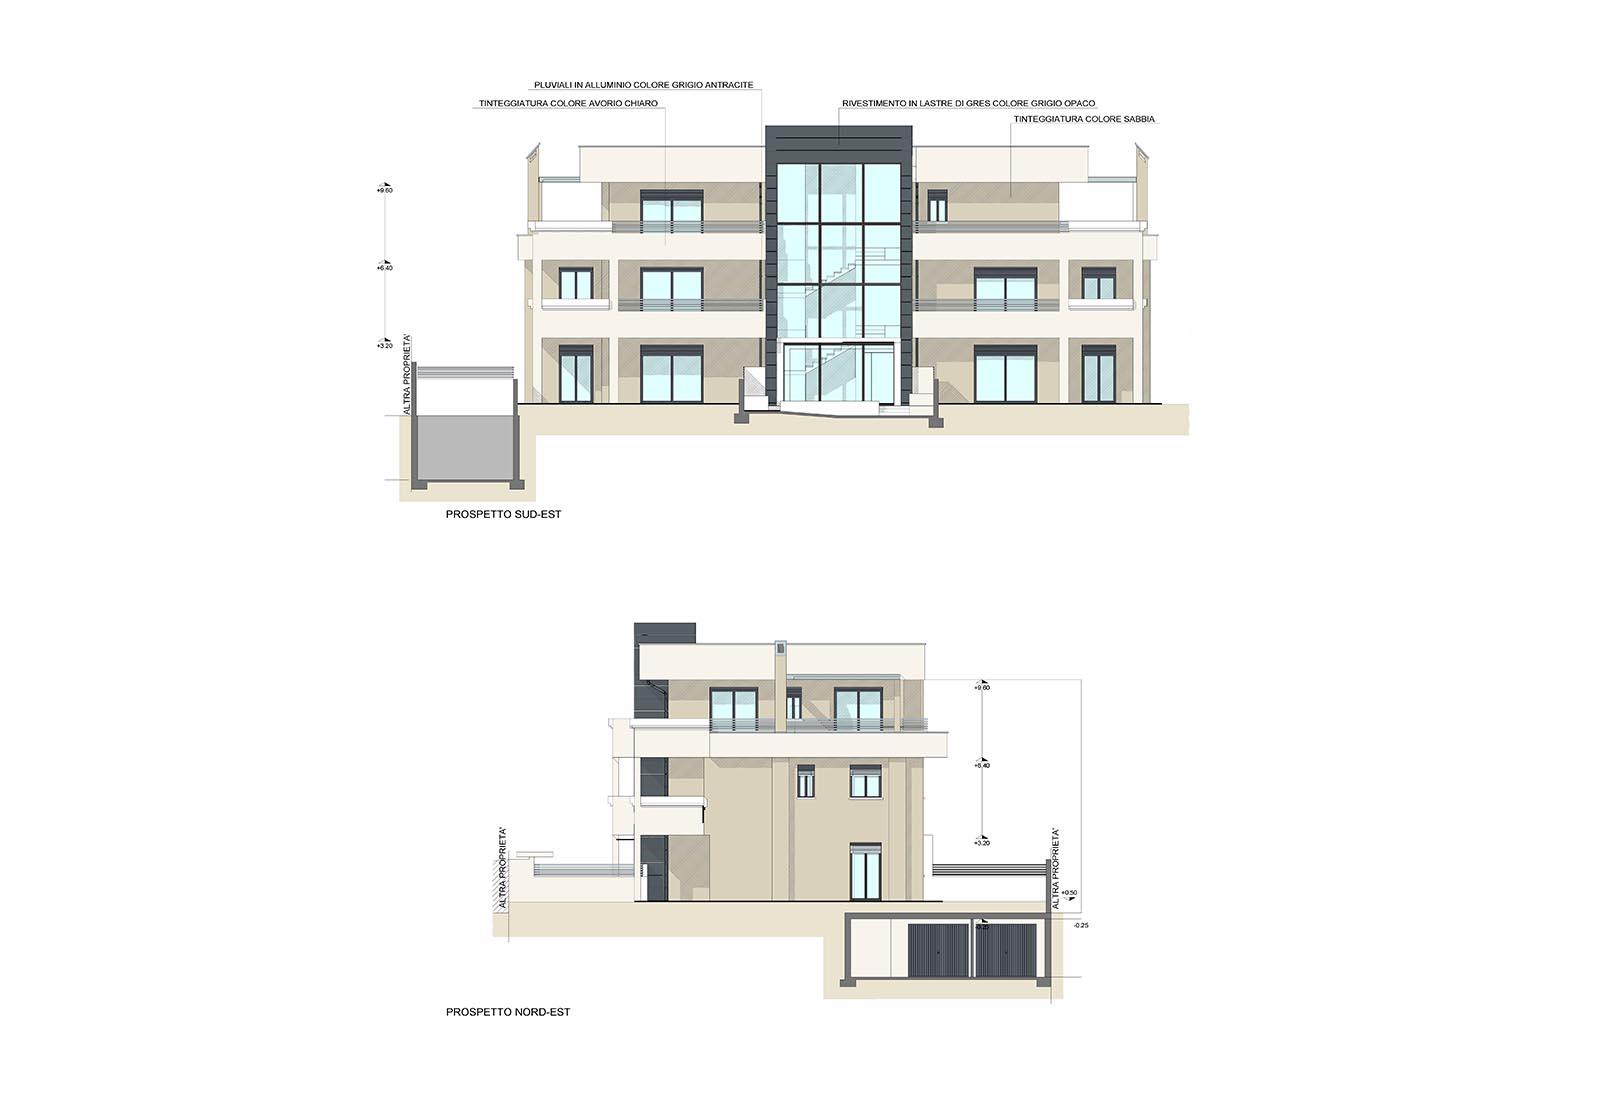 Residential building in Legnano street in Pregnana Milanese - Elevations